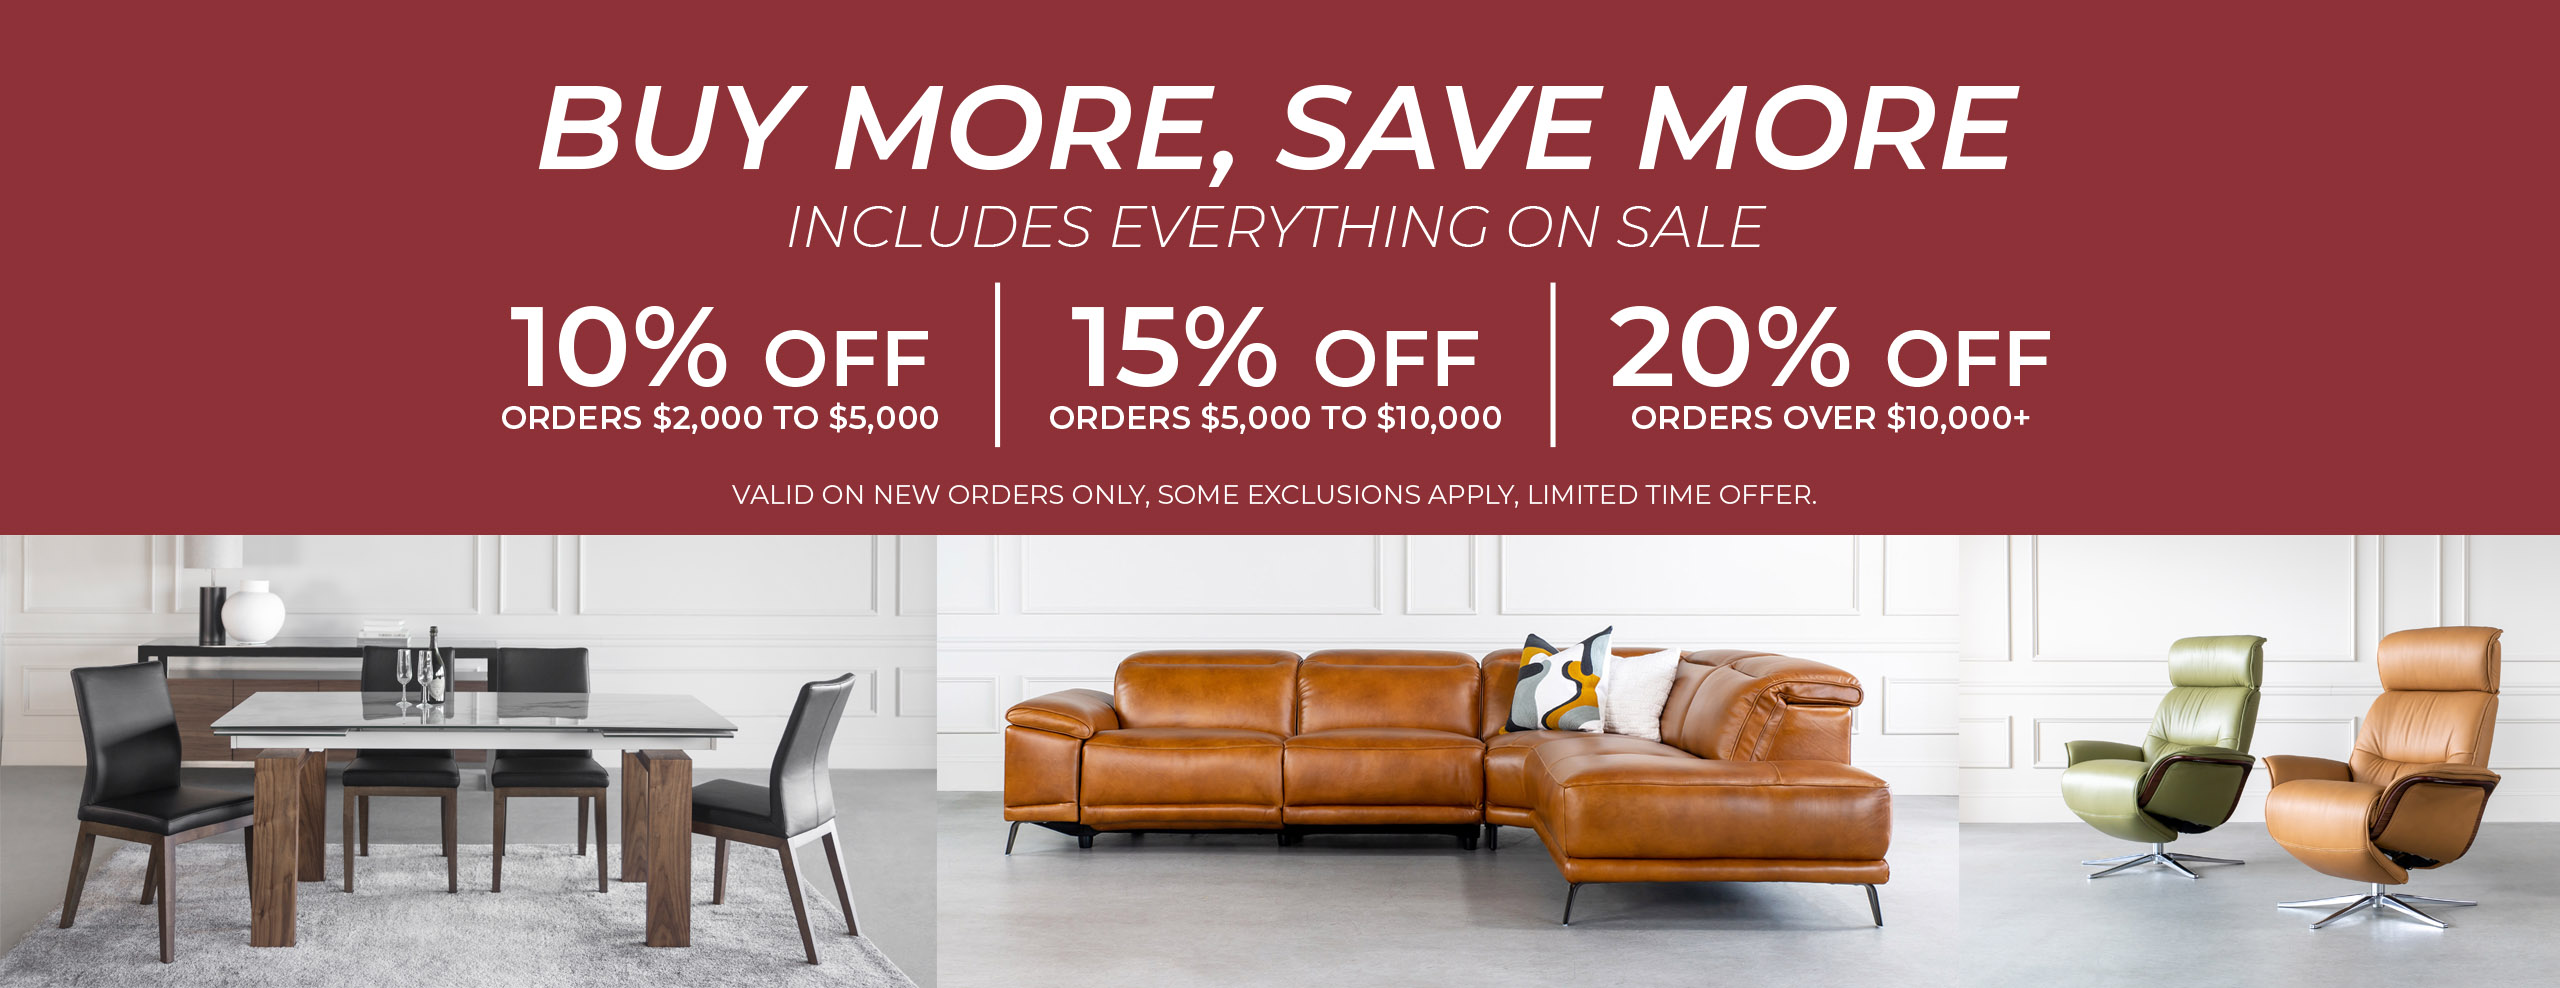 Buy More, Save More - ScanDesigns